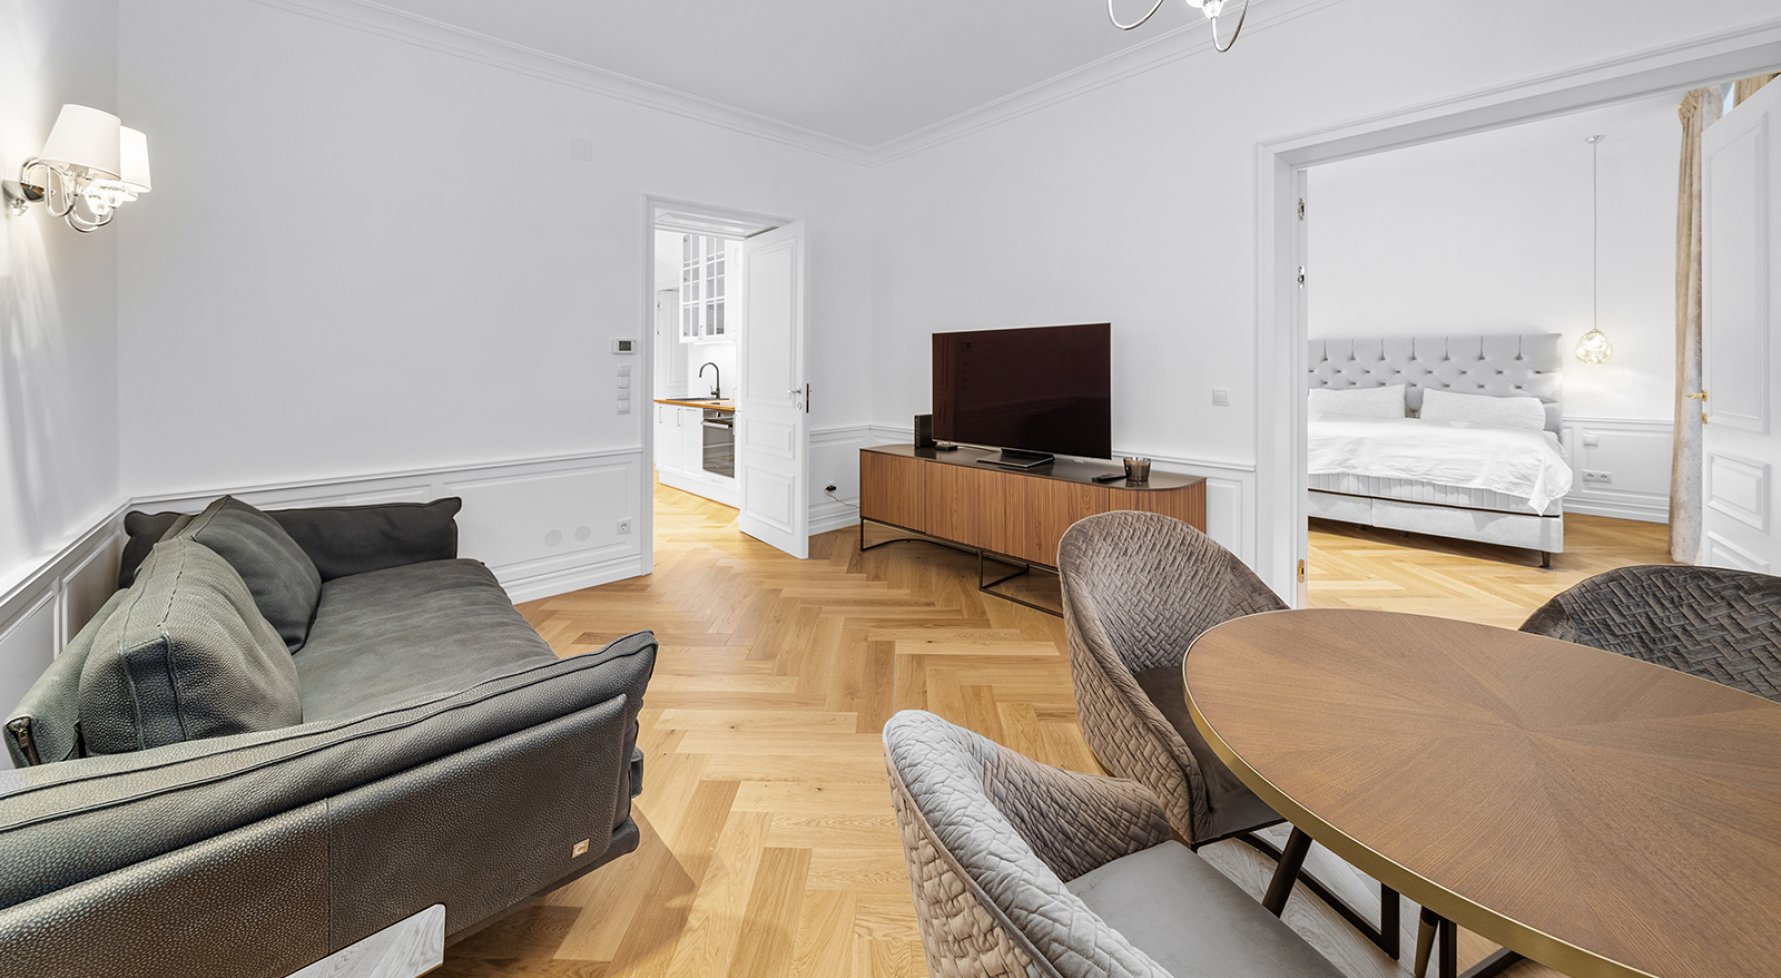 Property in 1010 Wien, 1. Bezirk: Beautifully renovated 3-room old building in Grünangergasse behind St. Stephen's C - picture 1